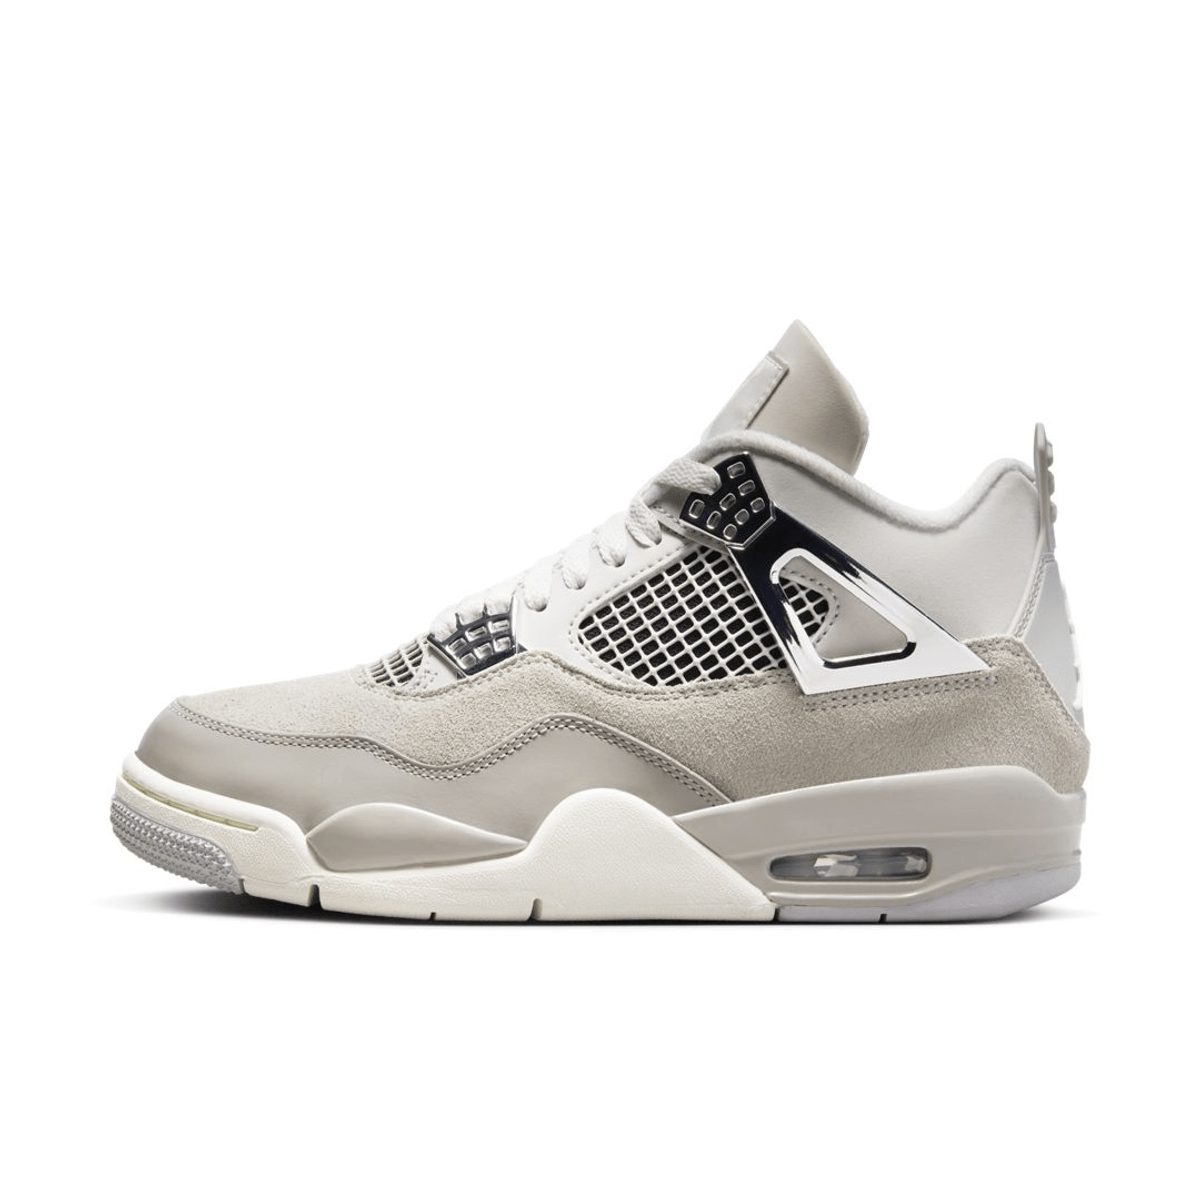 The Air Jordan 4 Frozen Moments Will Be Made Exclusively In WMNS Sizing